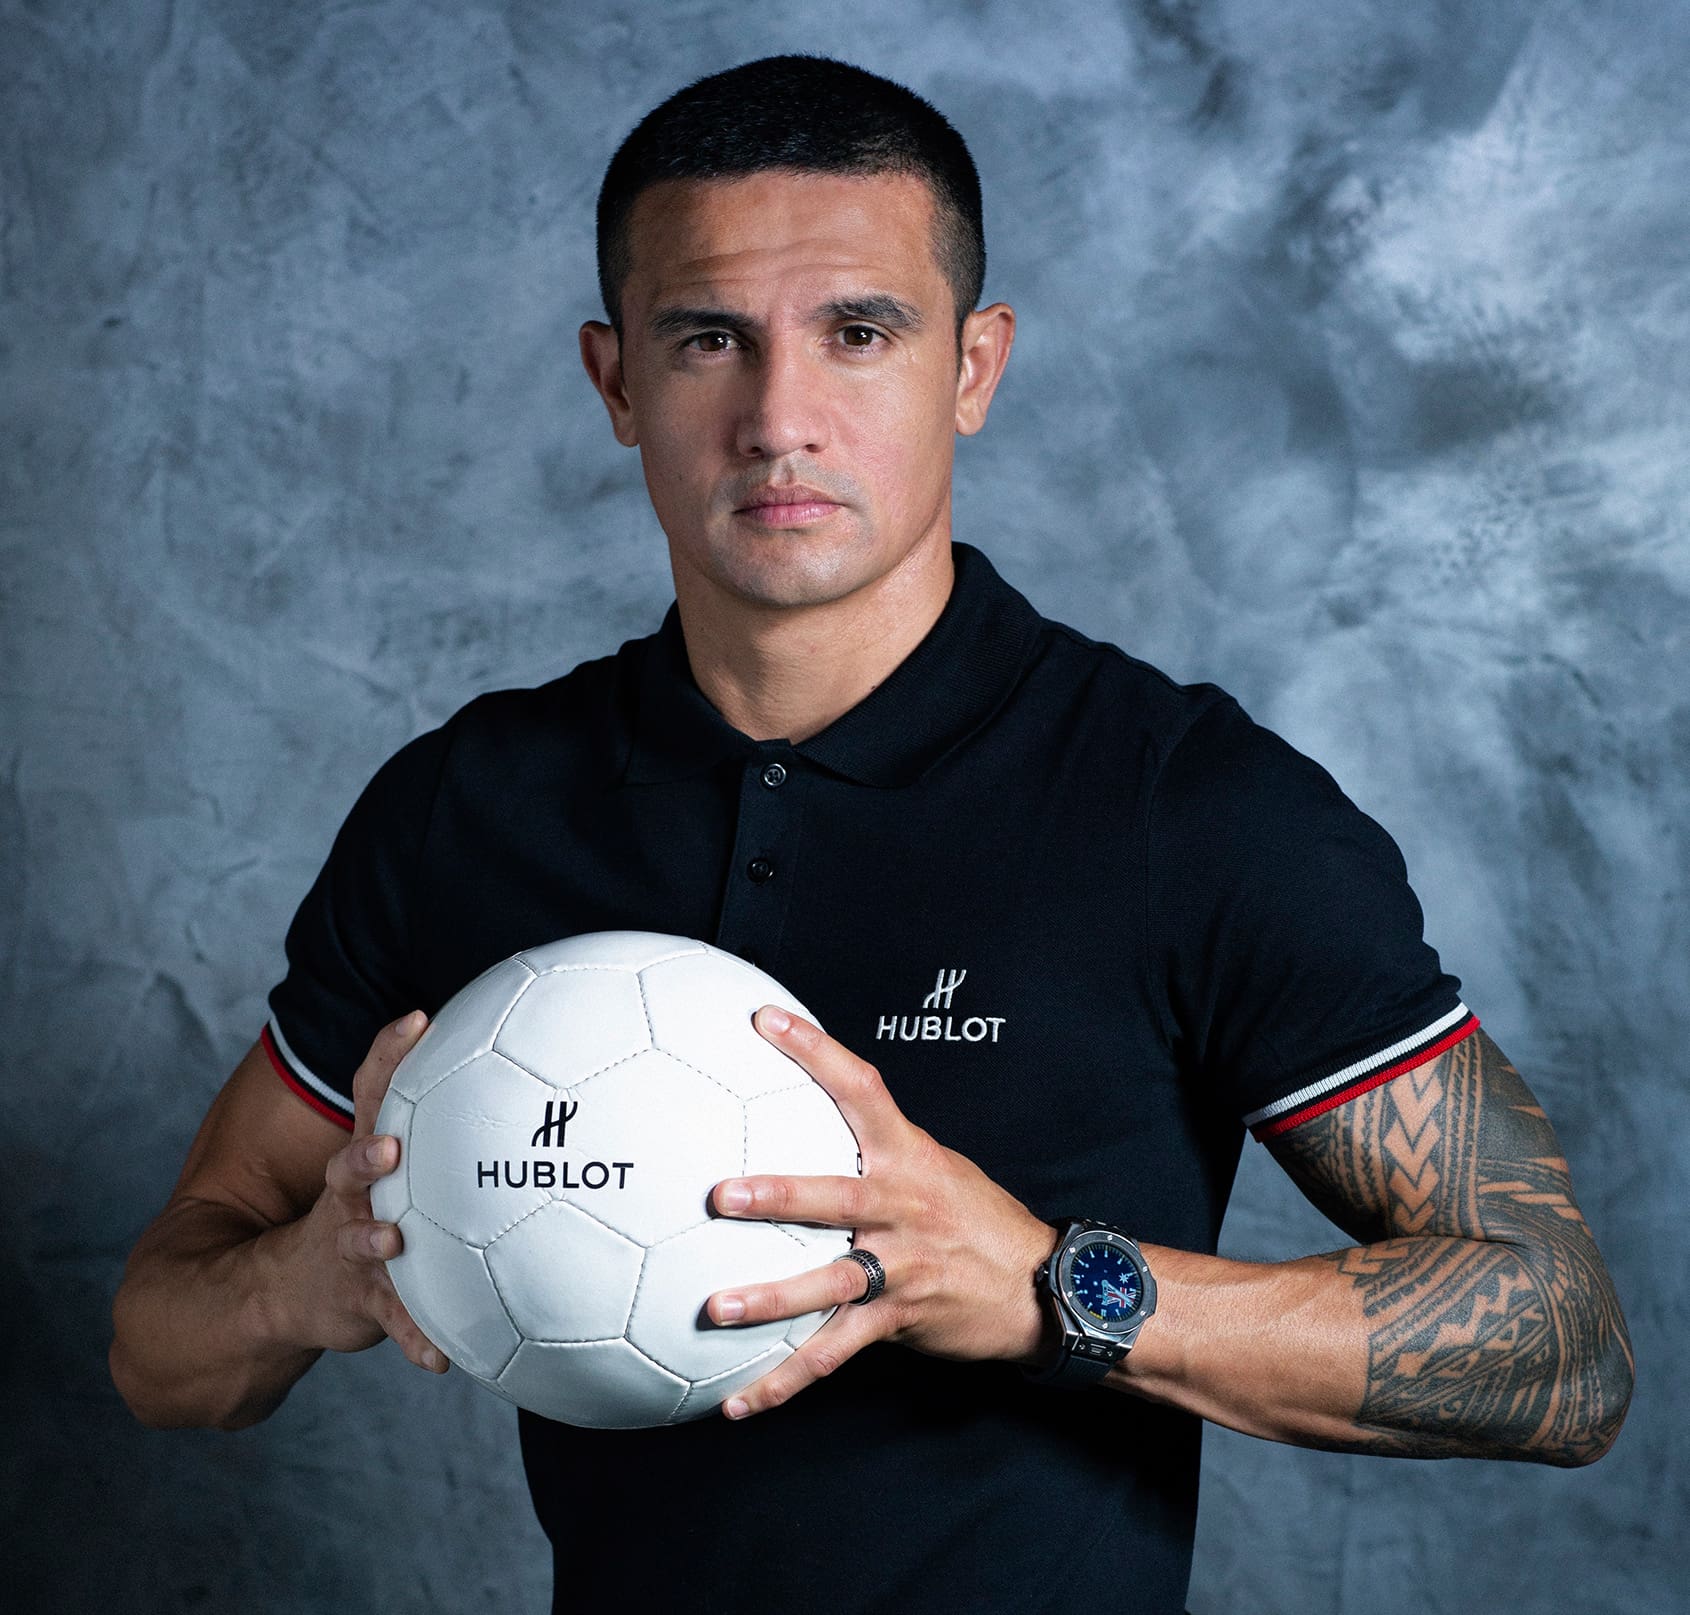 EVENT: Hublot loves Tim Cahill – the veteran Socceroo has just become a friend of the brand